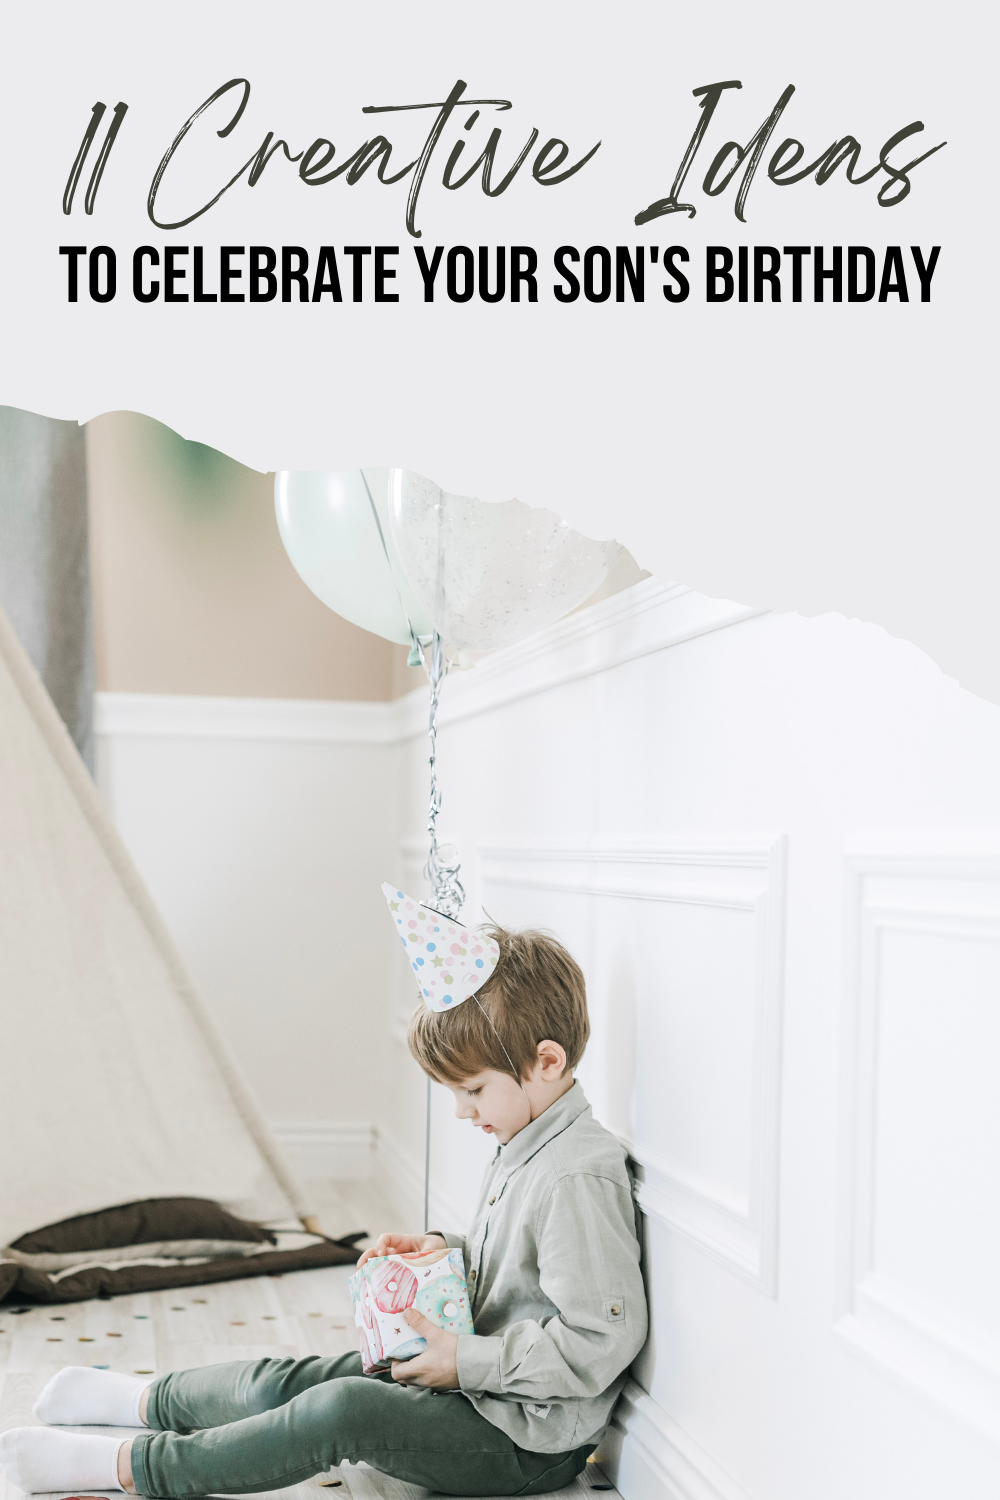 A little boy leans on a wall and behind him is a banner that says Happy Birthday, balloons float nearby. This article covers 11 creative ideas to celebrate your son's birthday party.